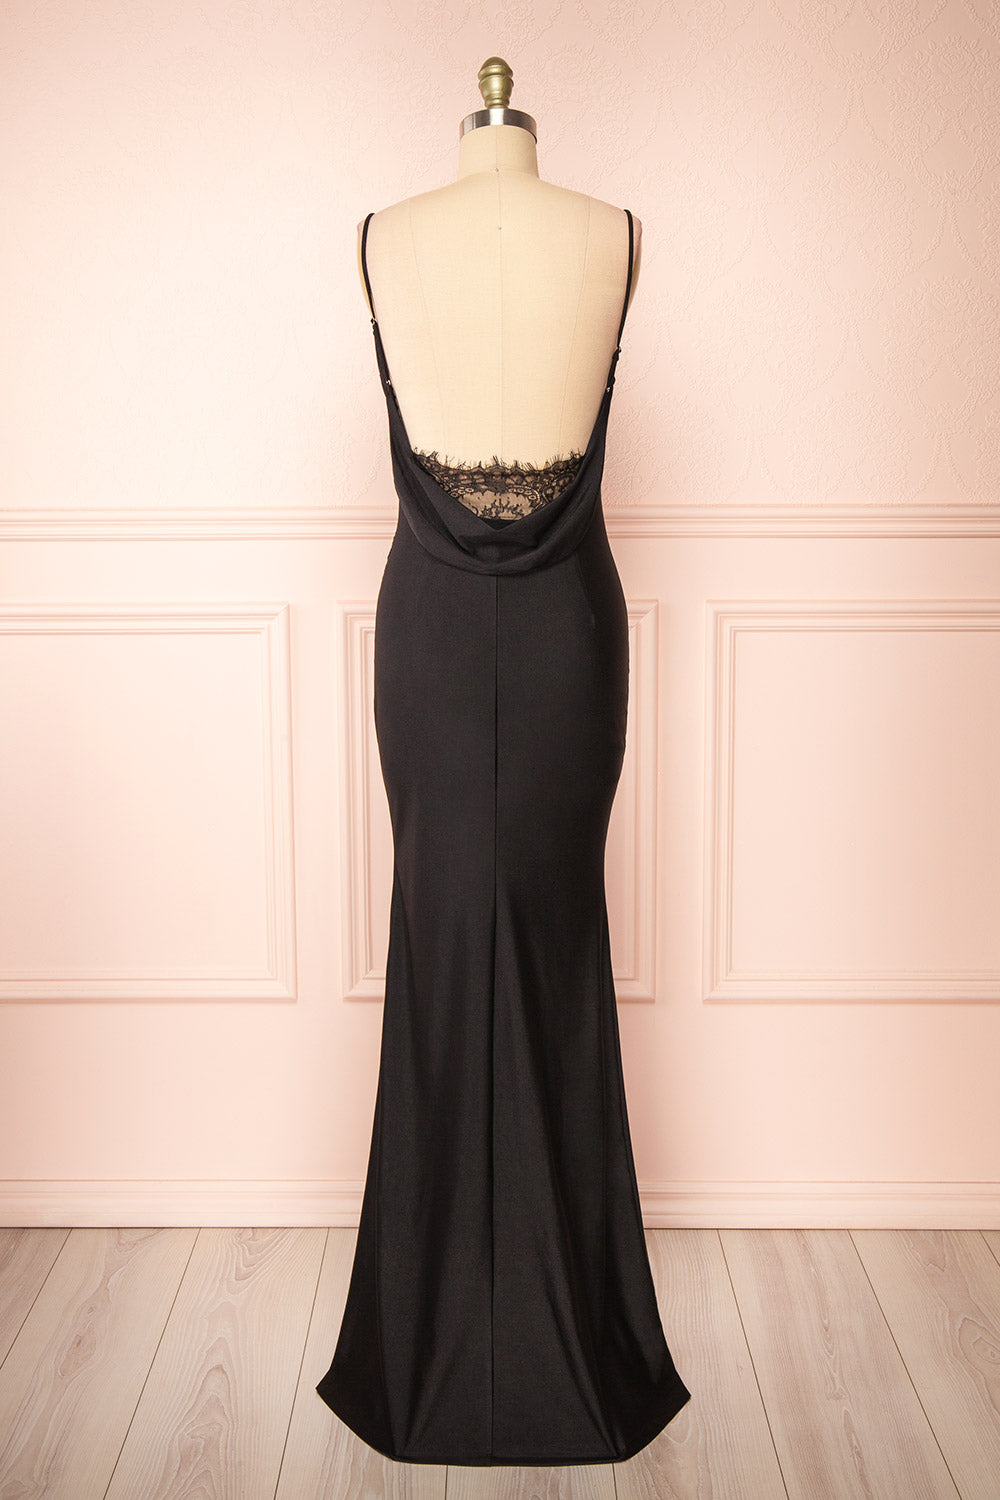 Kristen Black Fitted Maxi Dress w/ Cowl Neck | Boutique 1861 back view 